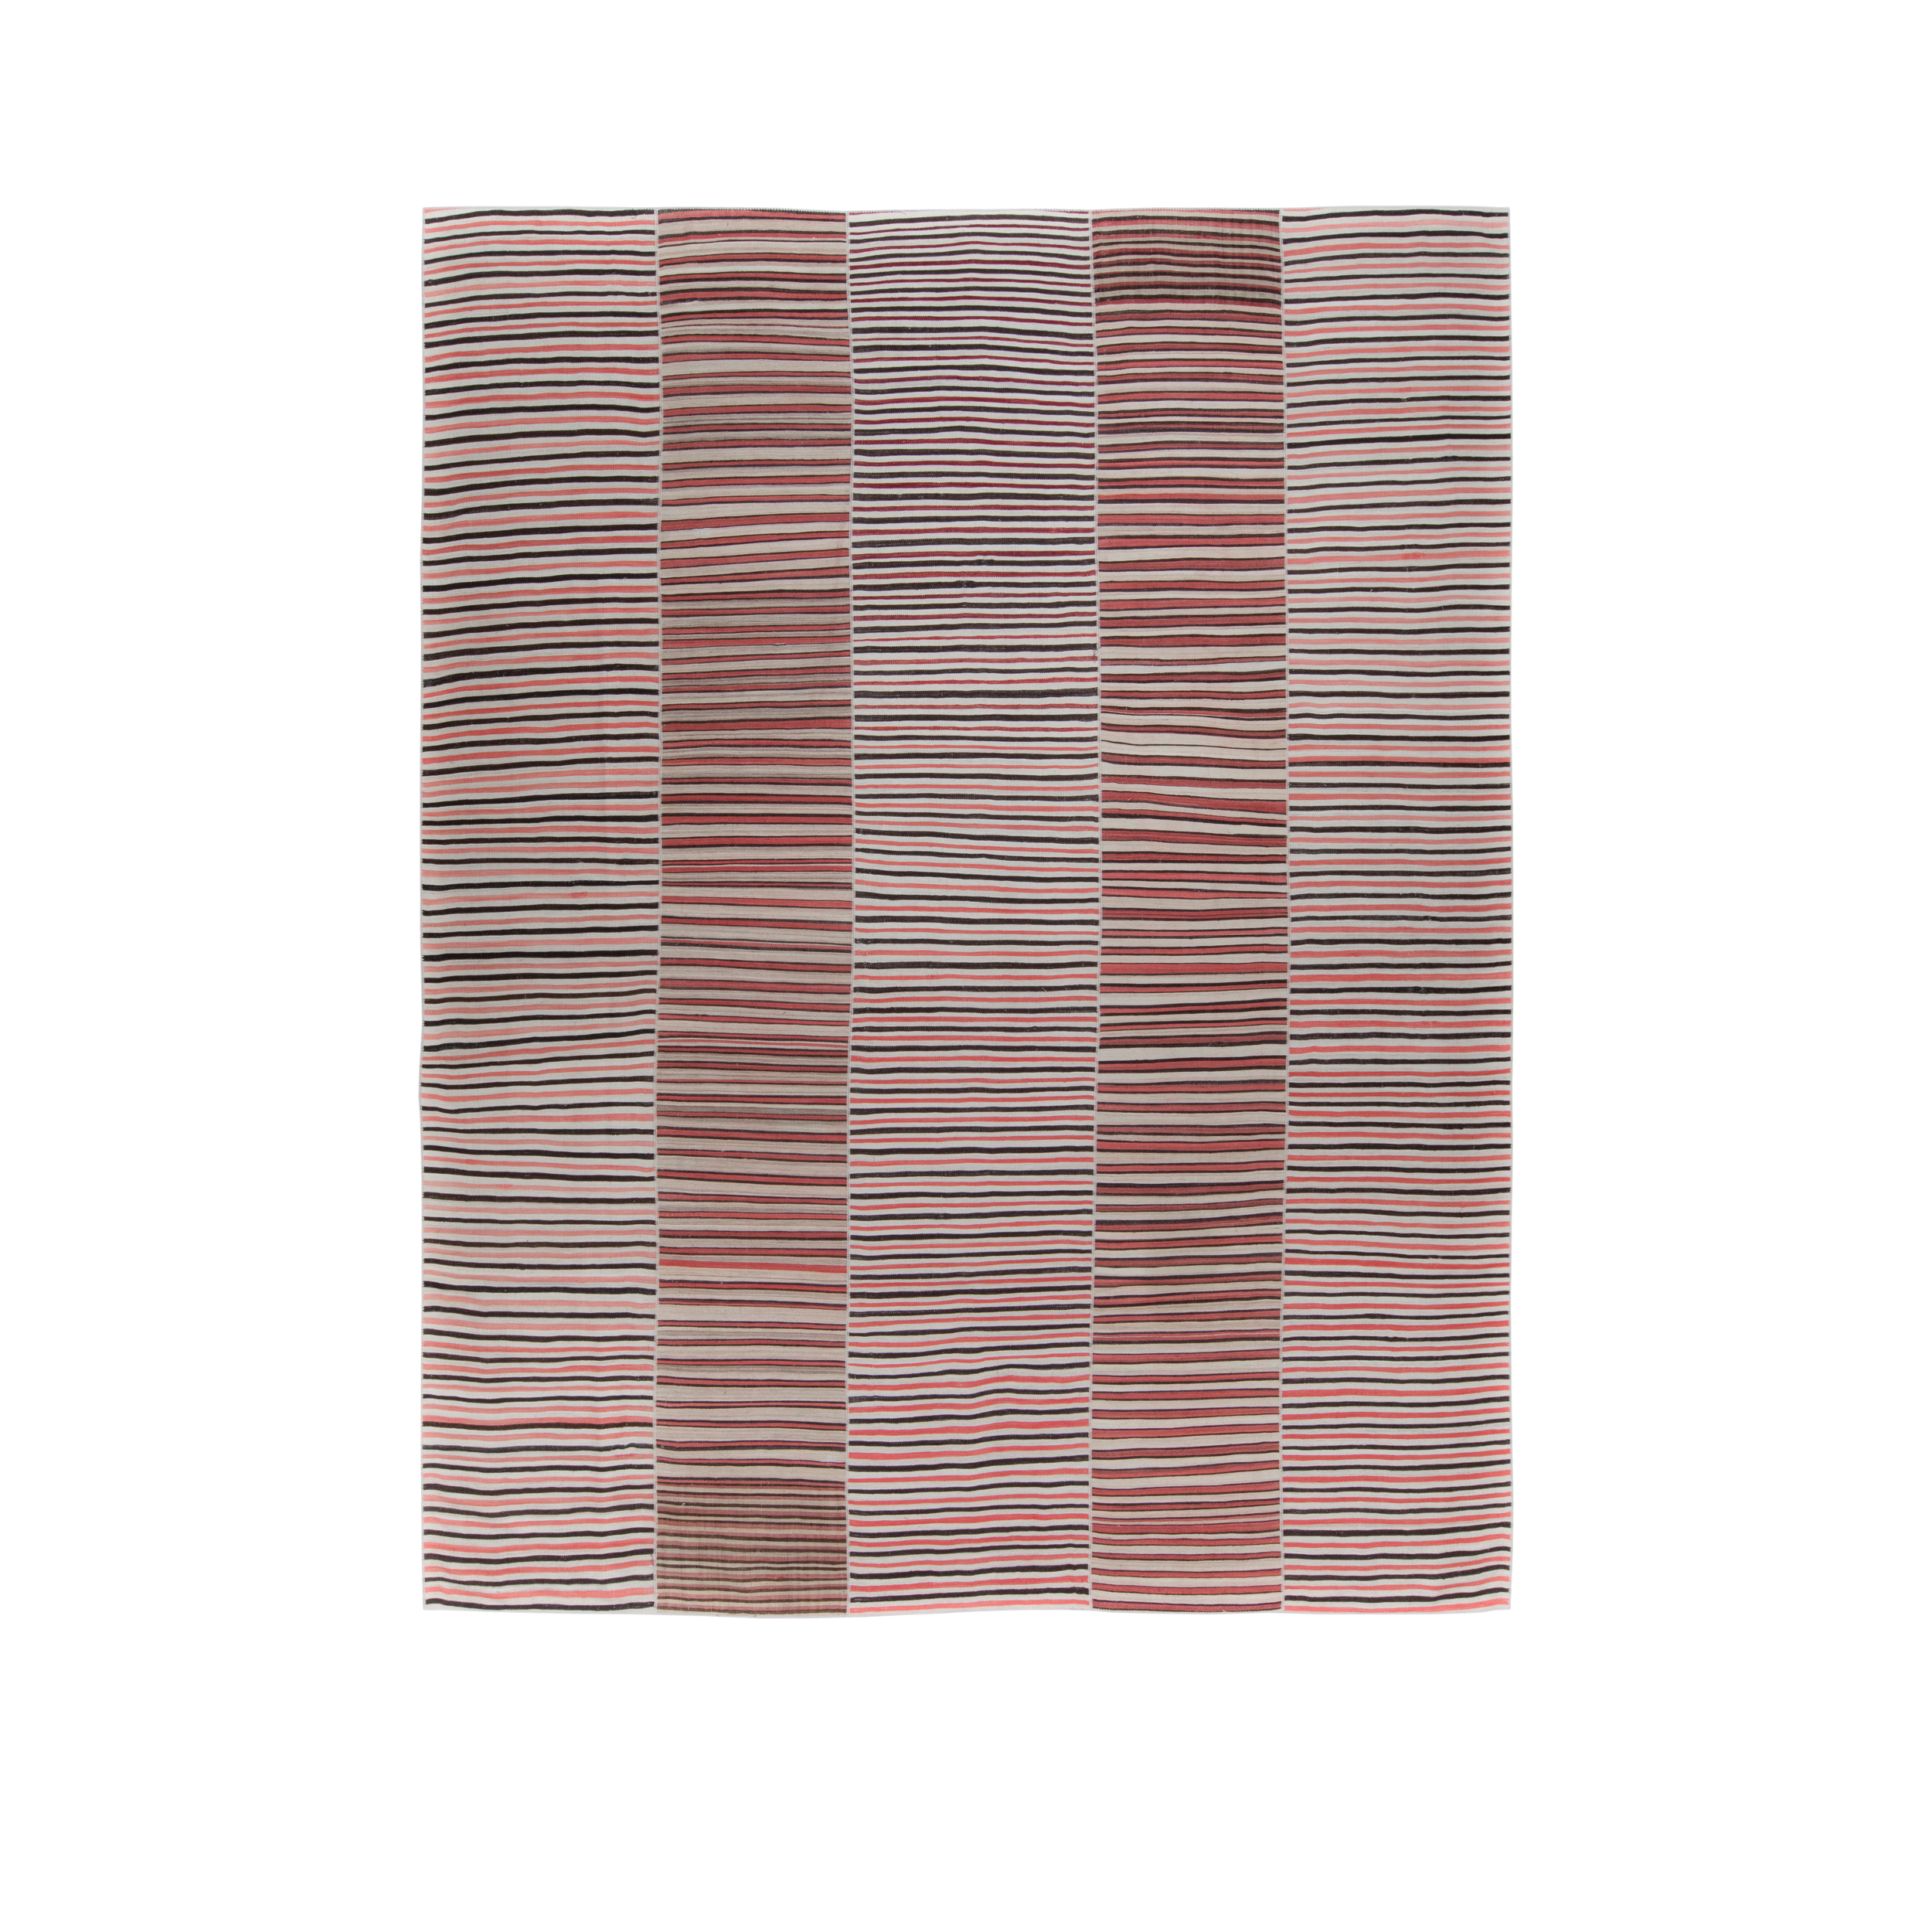 This Mazandaran rug is hand-woven and made of 100% wool